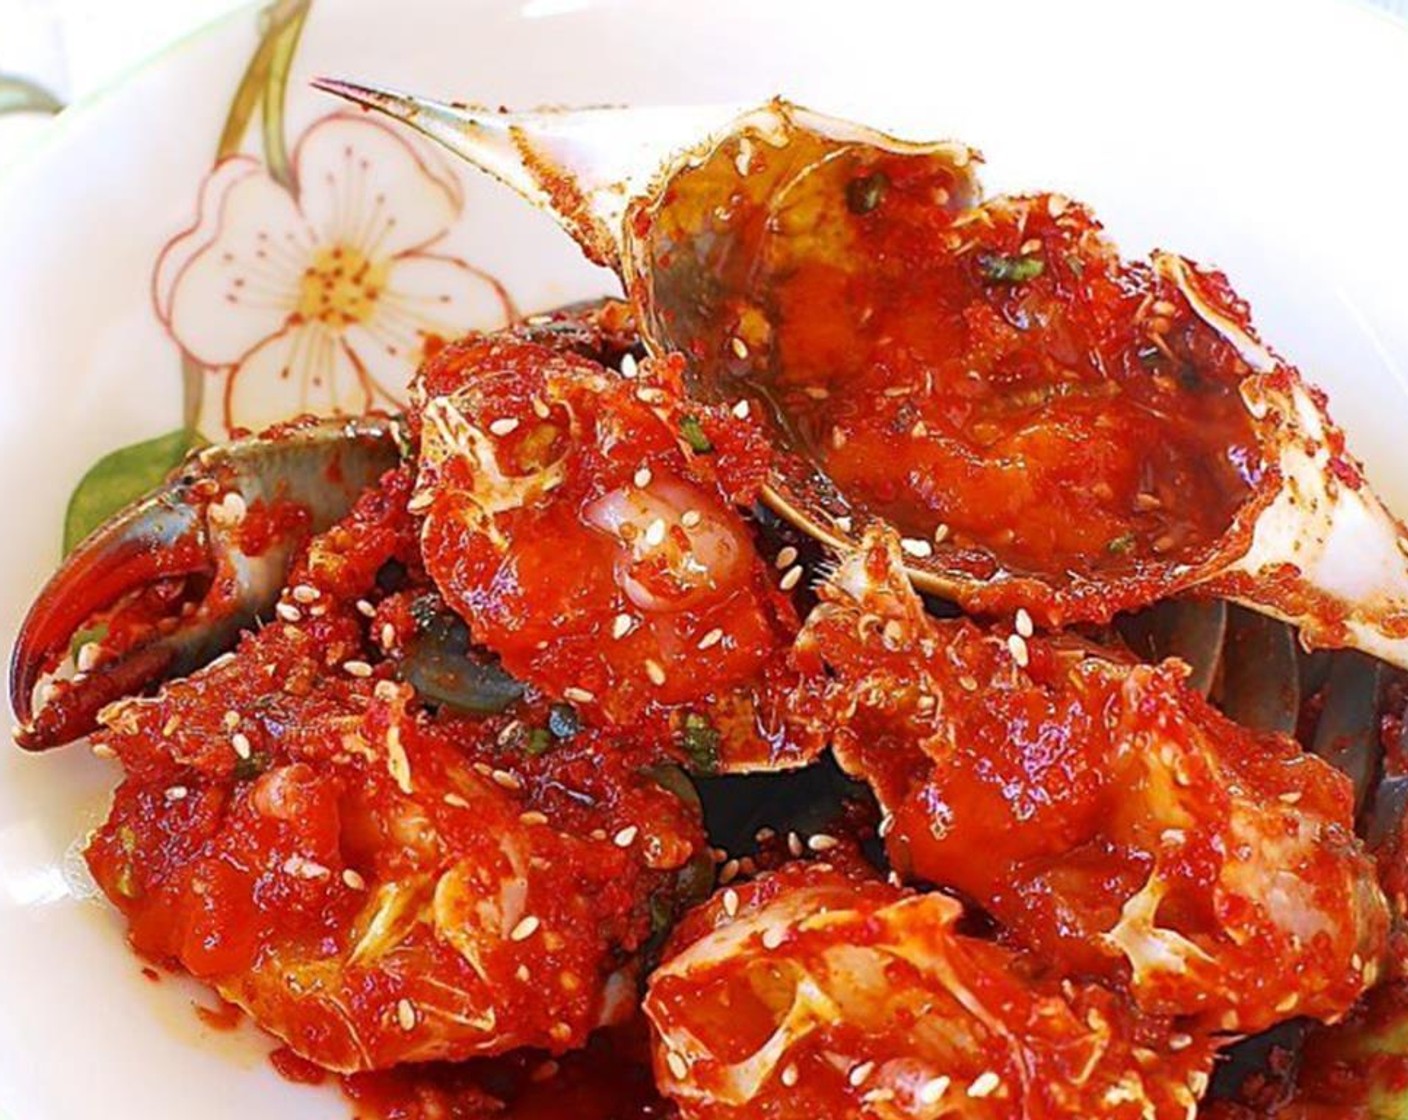 step 5 Combine the crabs and seasoning, and toss to coat well. Spoon some sauce into the top shells. Marinate for a few hours at least or up to a couple of days in the fridge. These spicy crabs are best eaten within a couple of days. Enjoy!